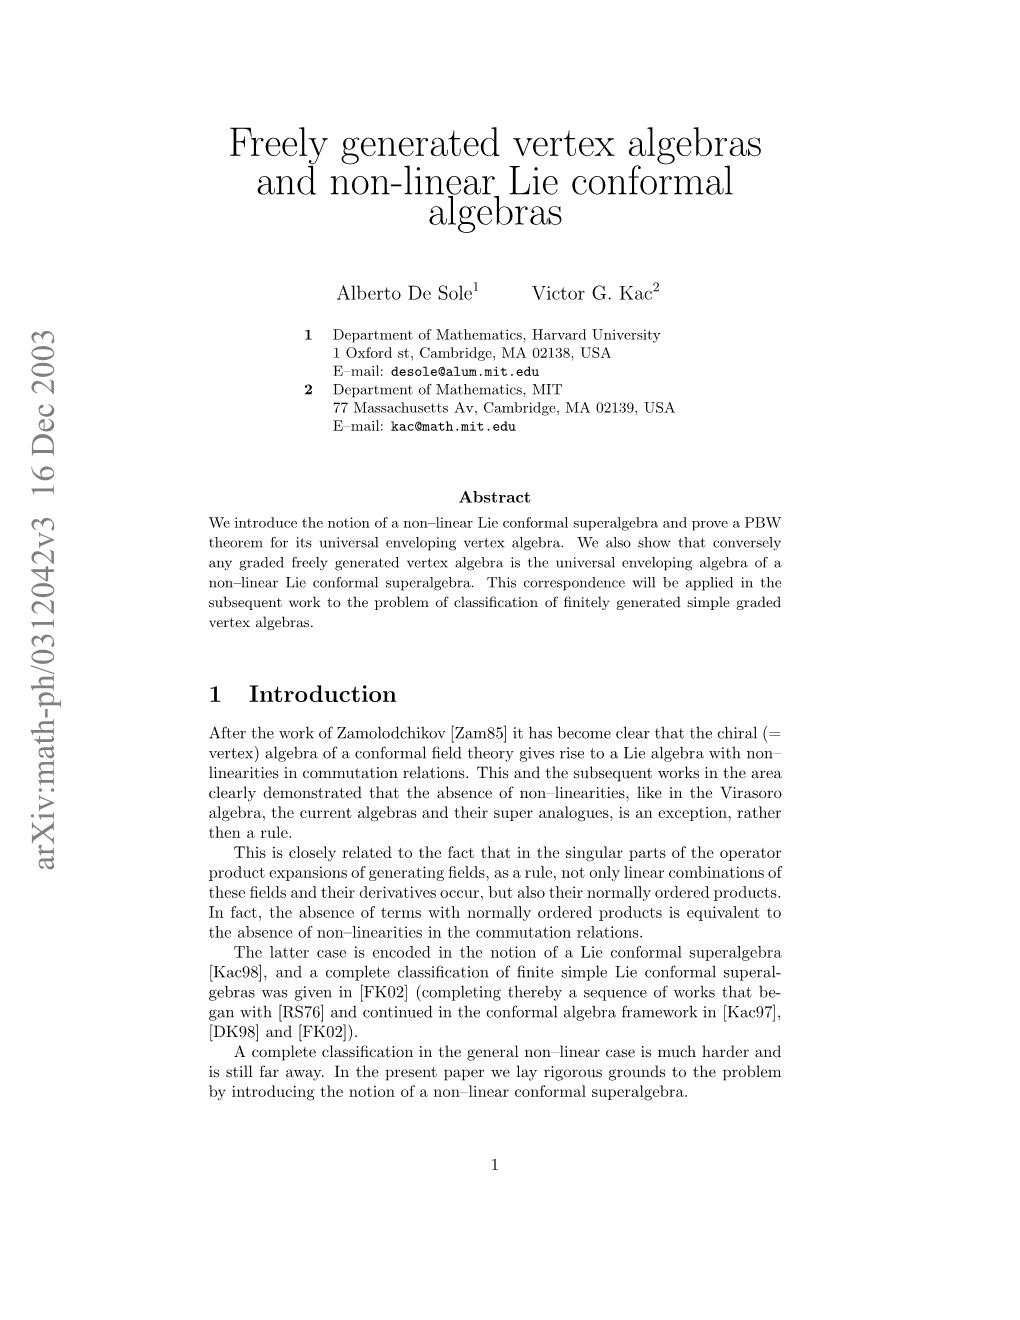 Freely Generated Vertex Algebras and Non-Linear Lie Conformal